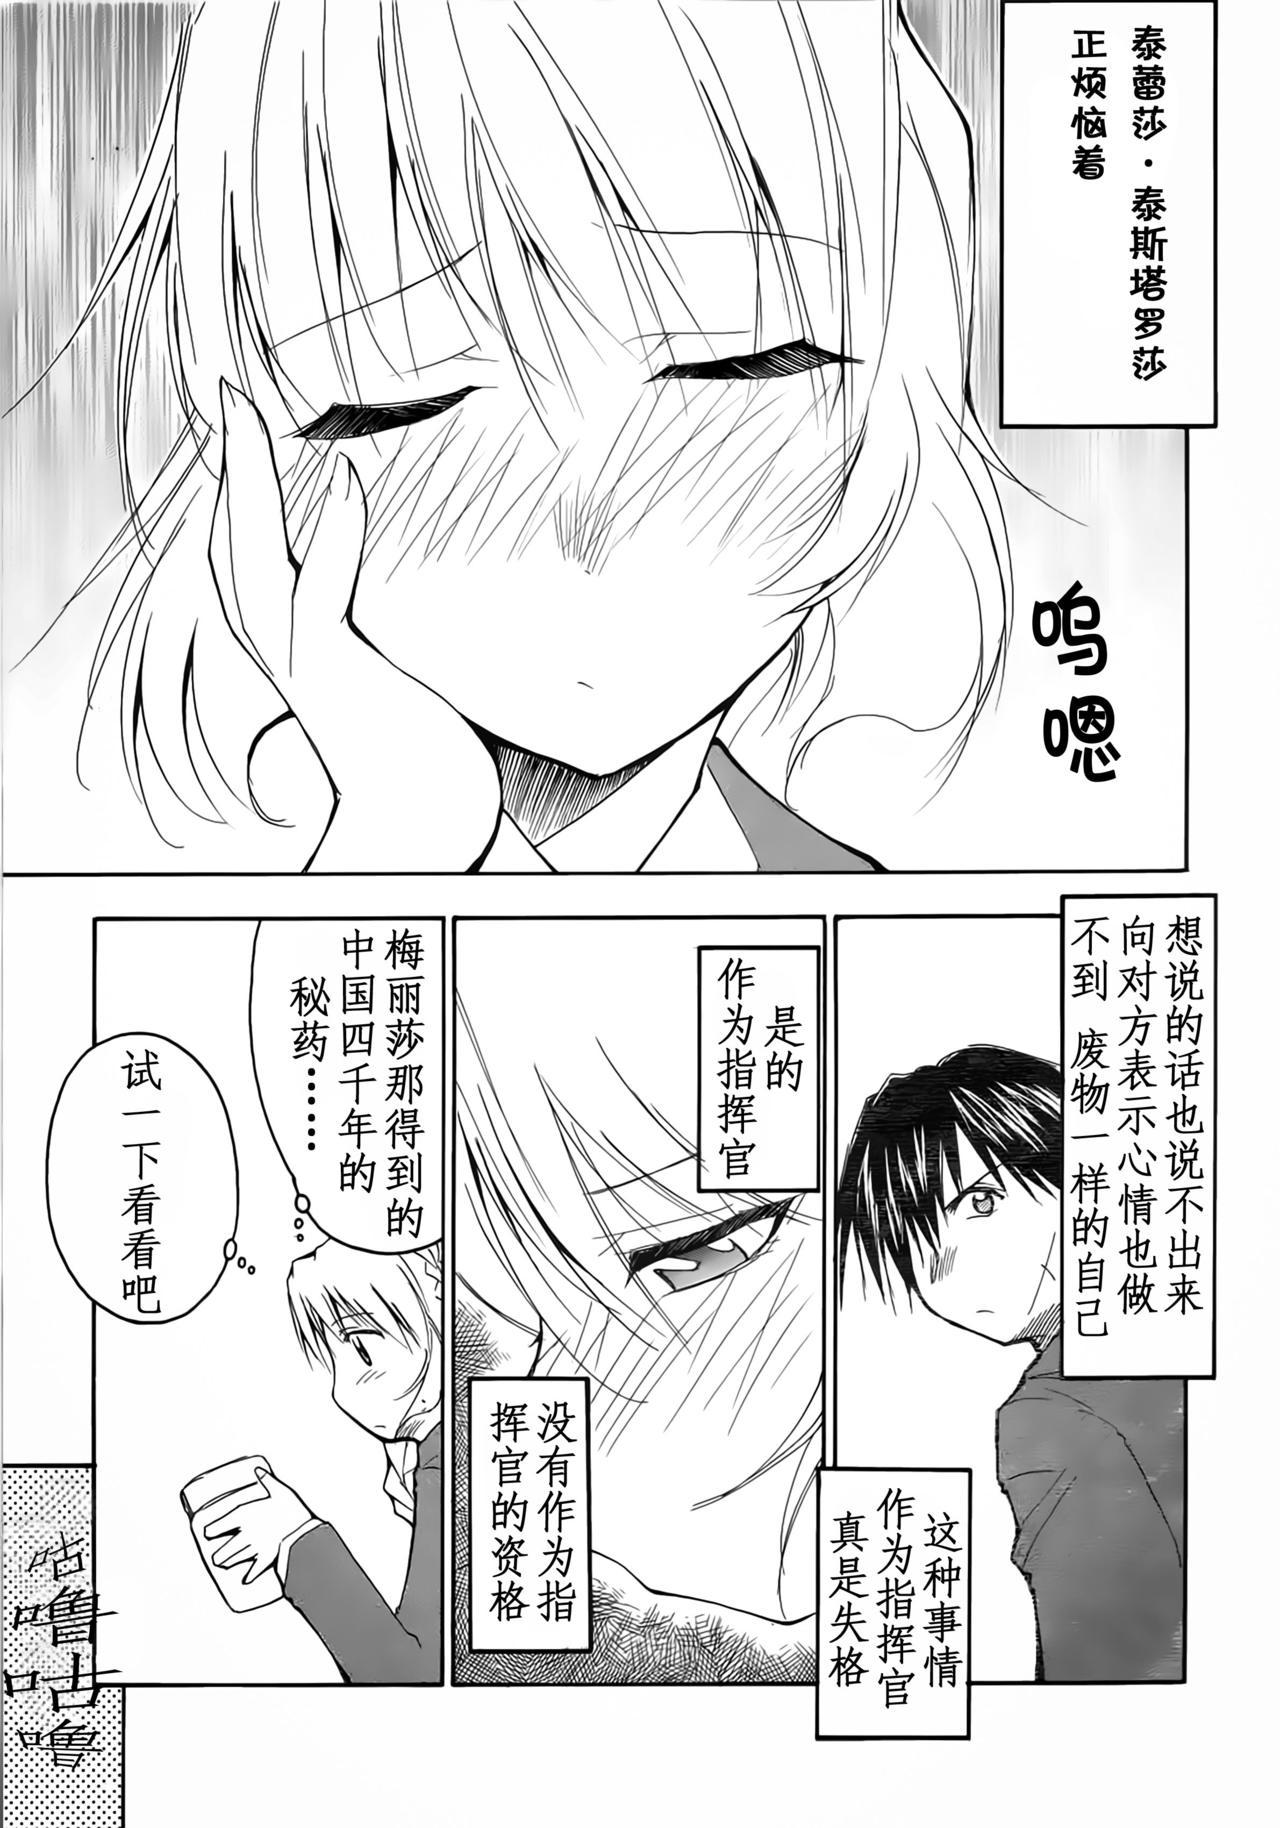 Busty FULL METAL 2 - Full metal panic Publico - Page 6